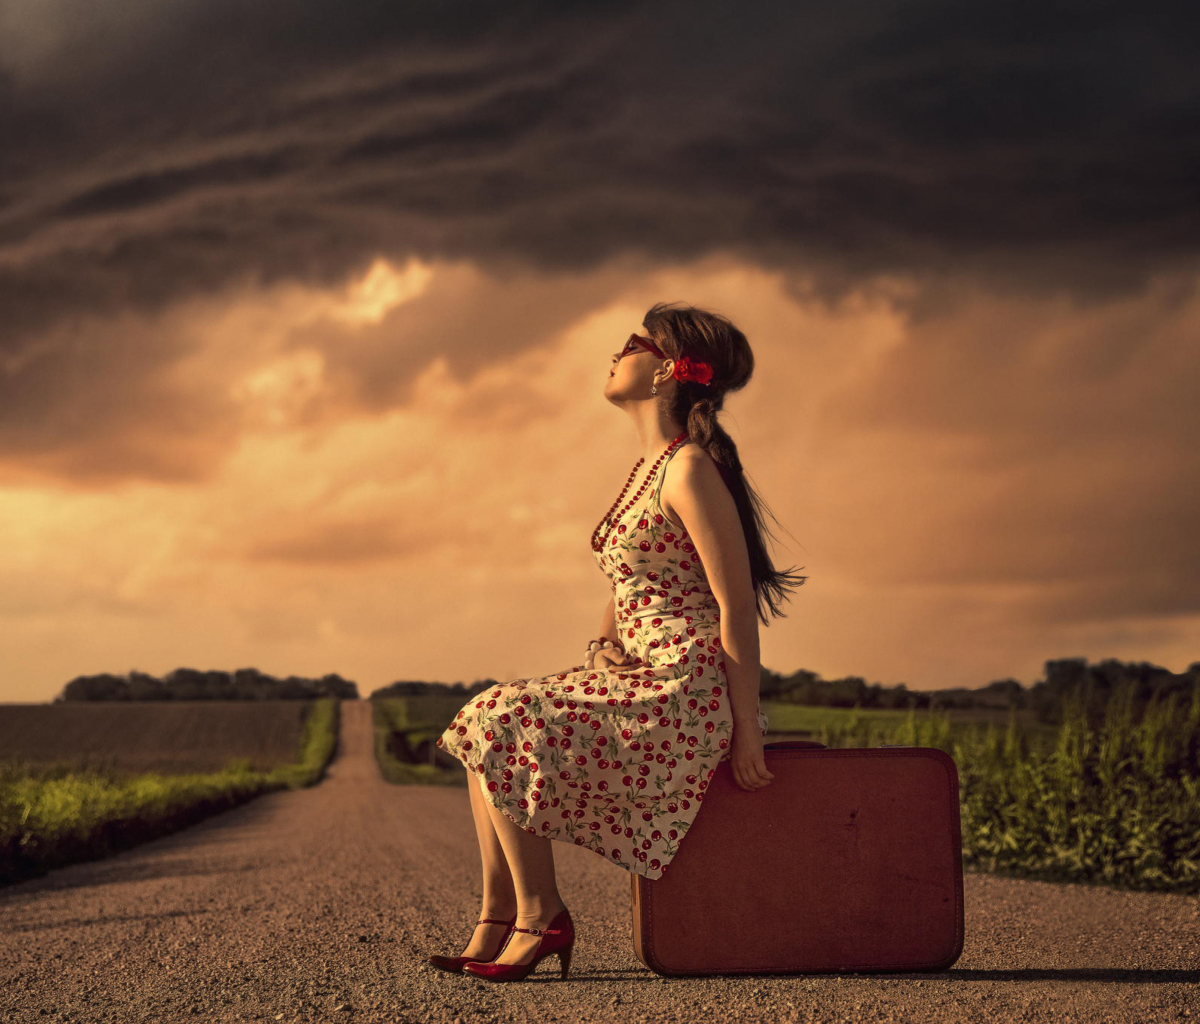 Girl Sitting On Luggage On Road wallpaper 1200x1024